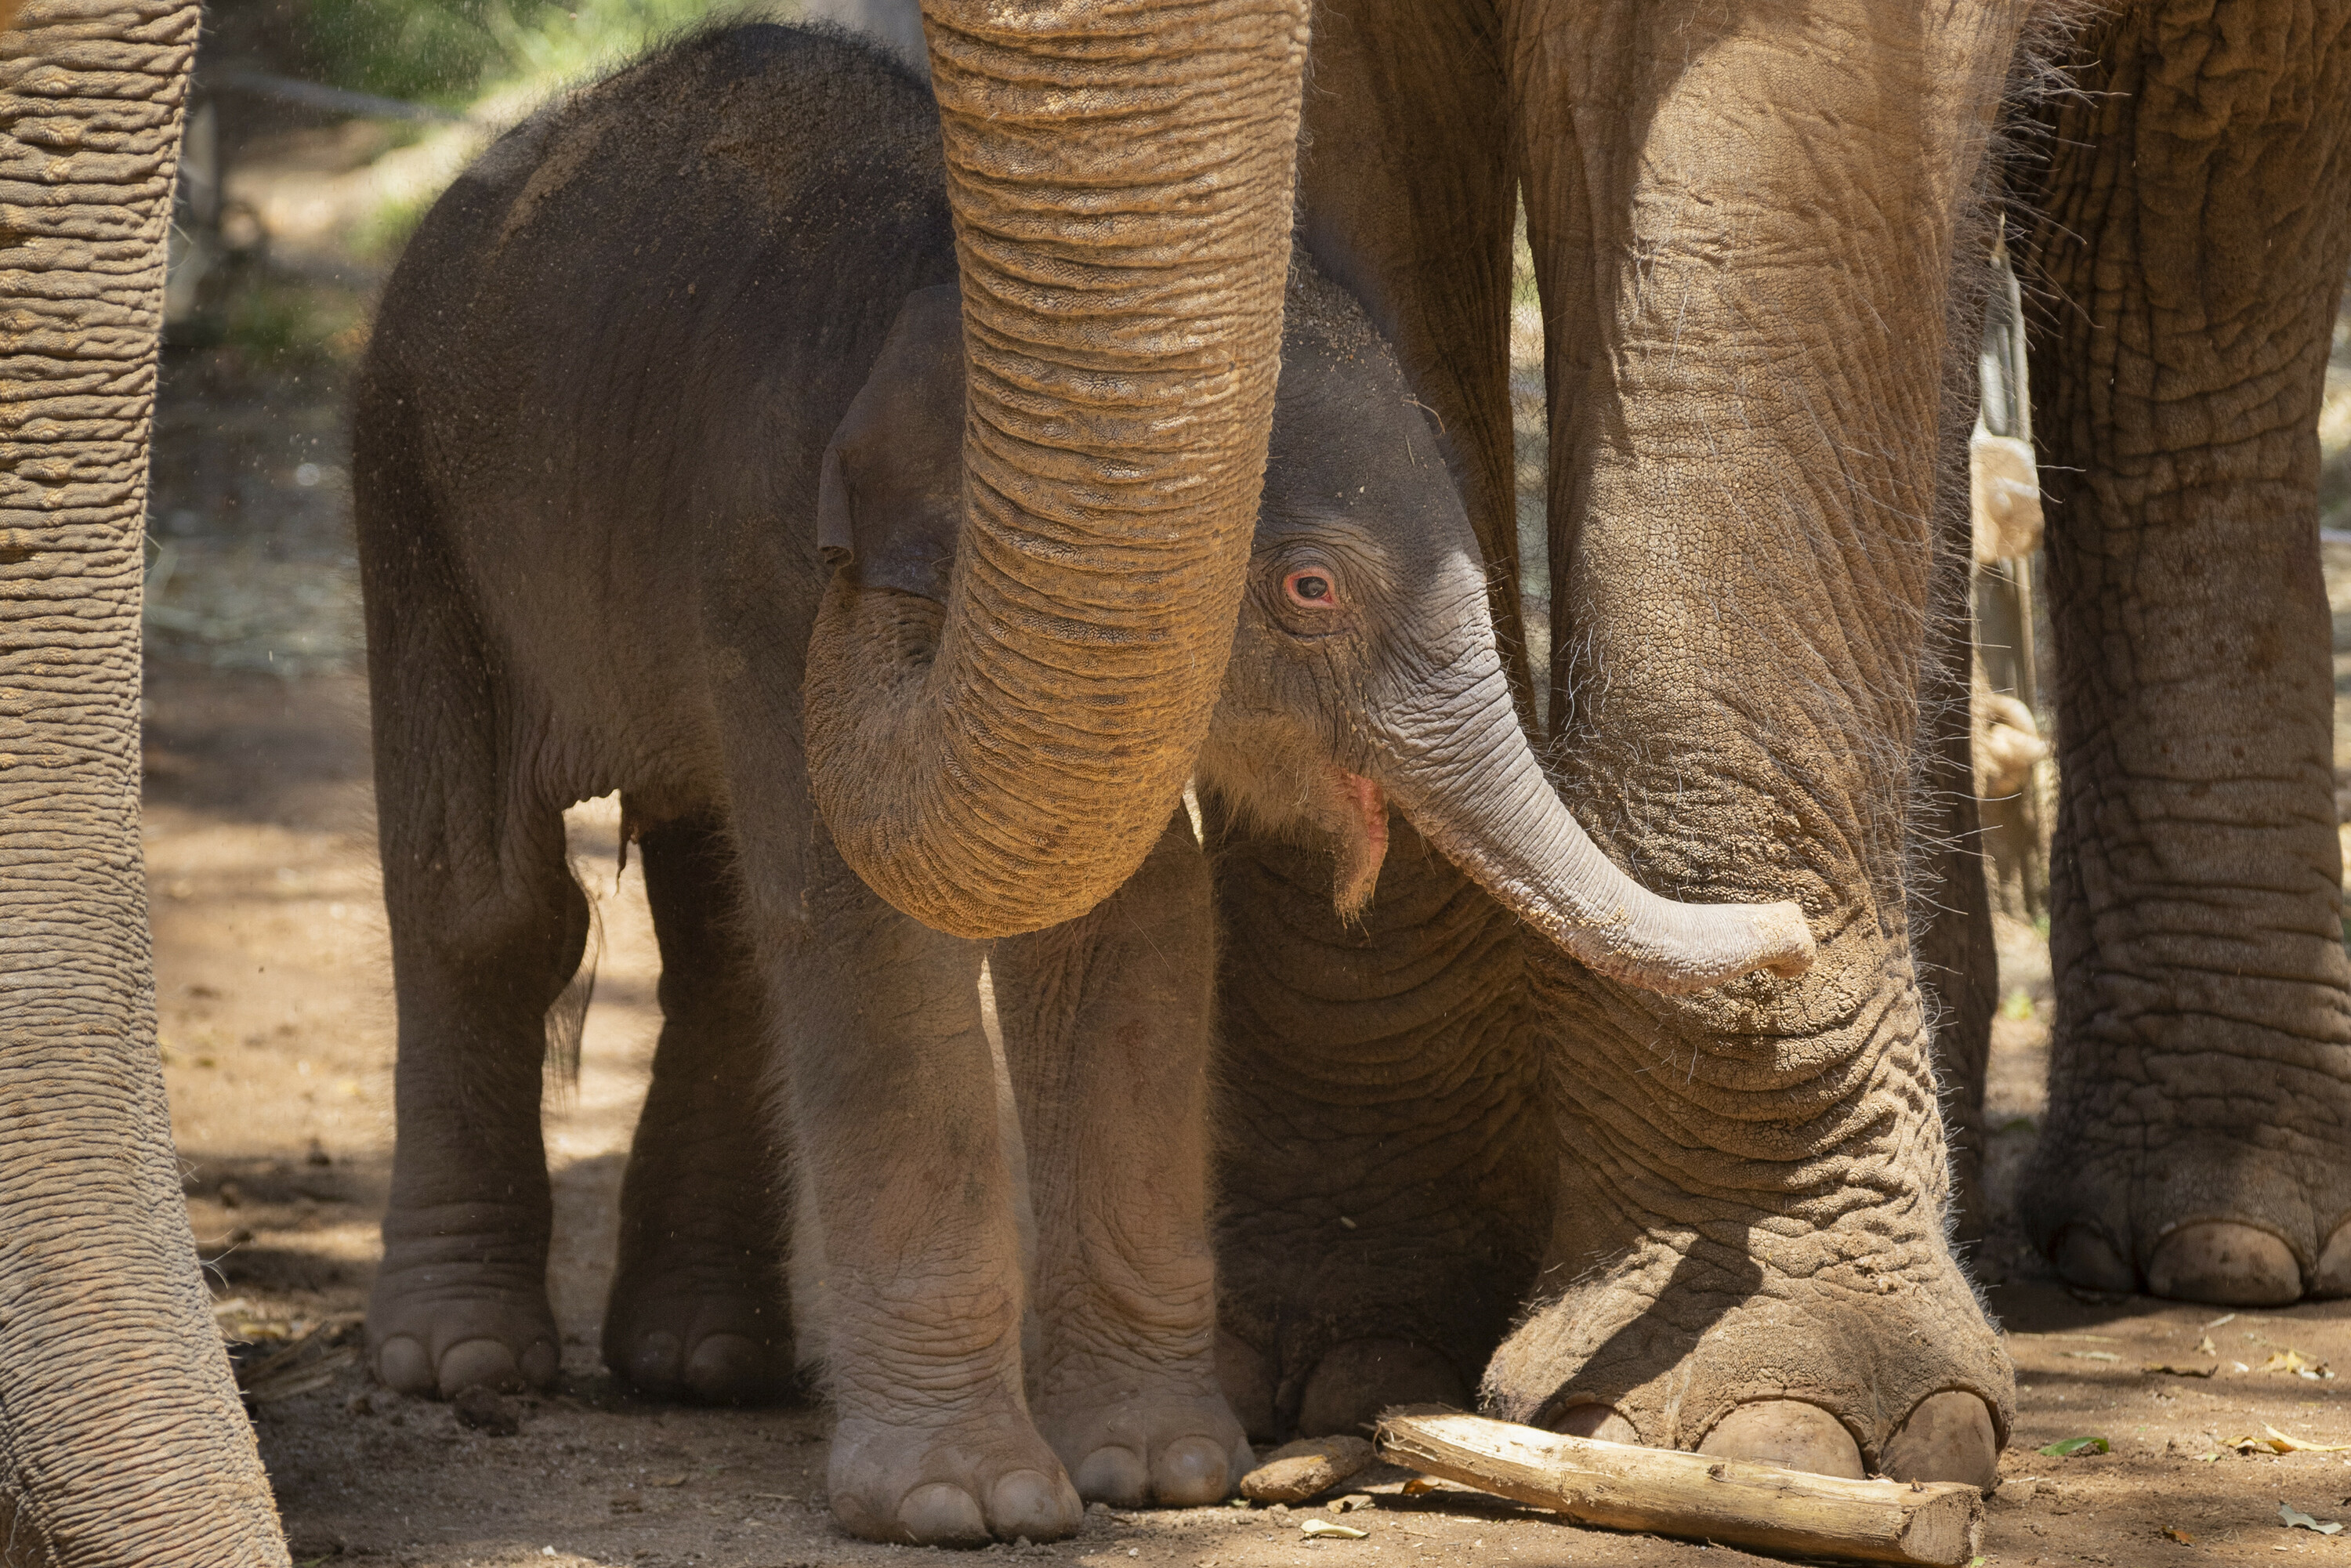 A third adorable baby elephant calf was just born at Melbourne Zoo